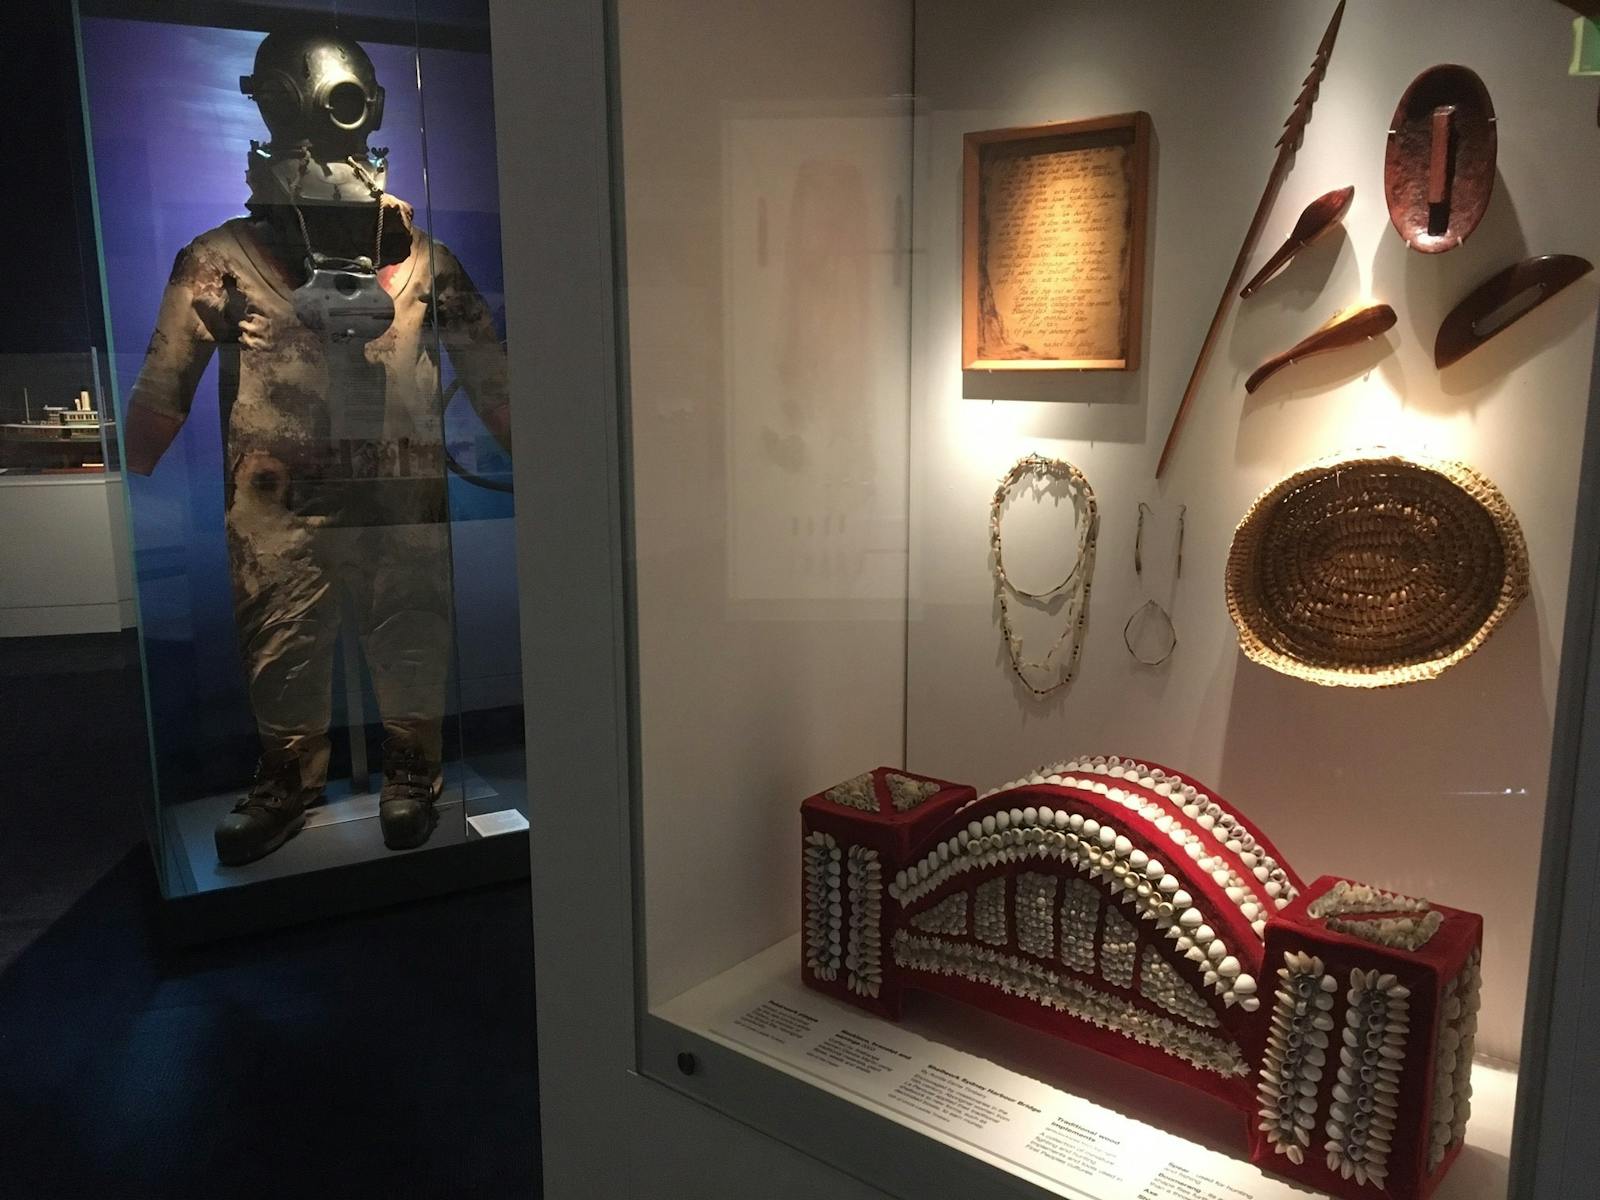 The History Gallery: including diving suit and Aboriginal objects